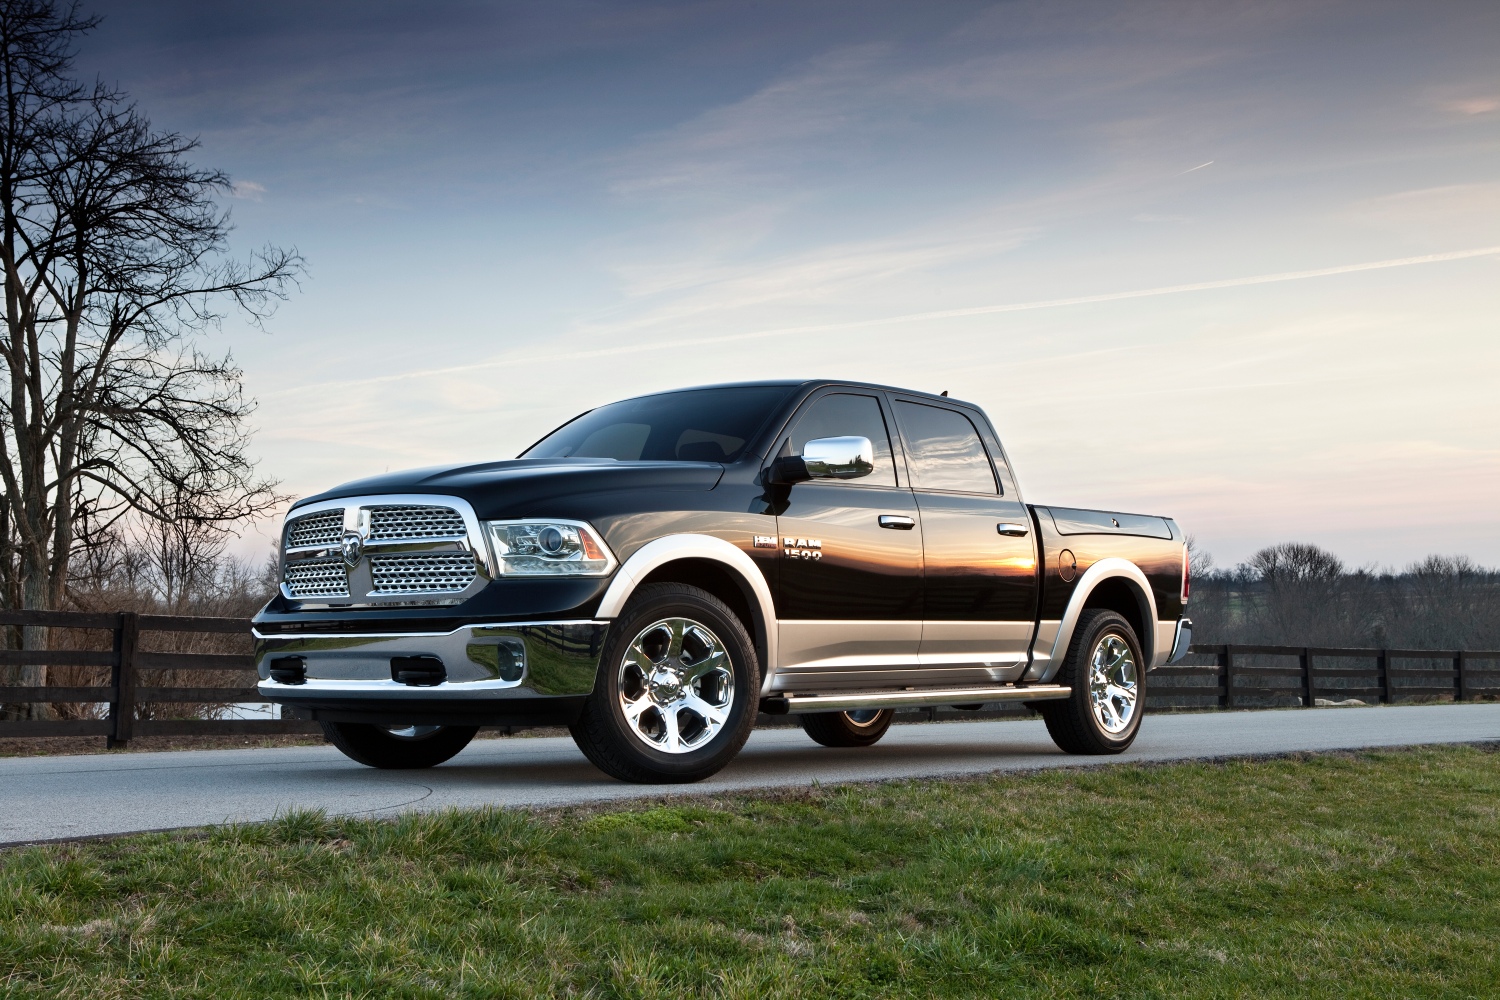 The best full-size used trucks under $25,000 include this Ram 1500